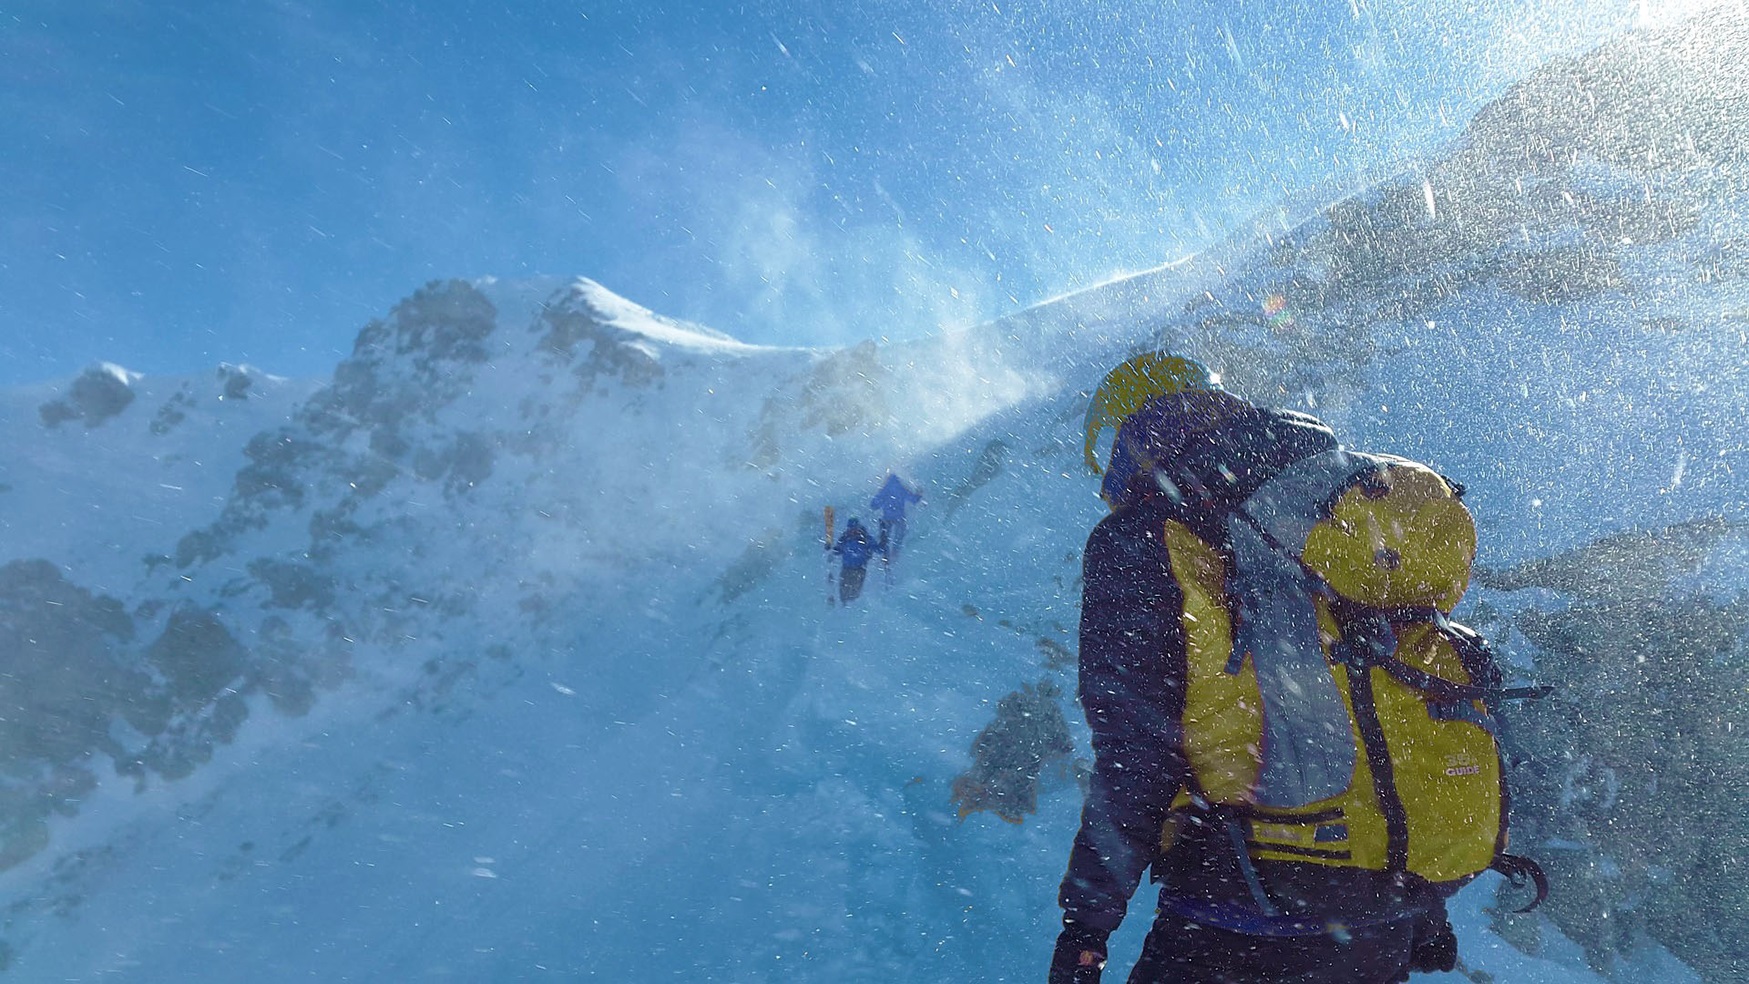 Mountaineer climbing a snowy mountain in harsh weather conditions.